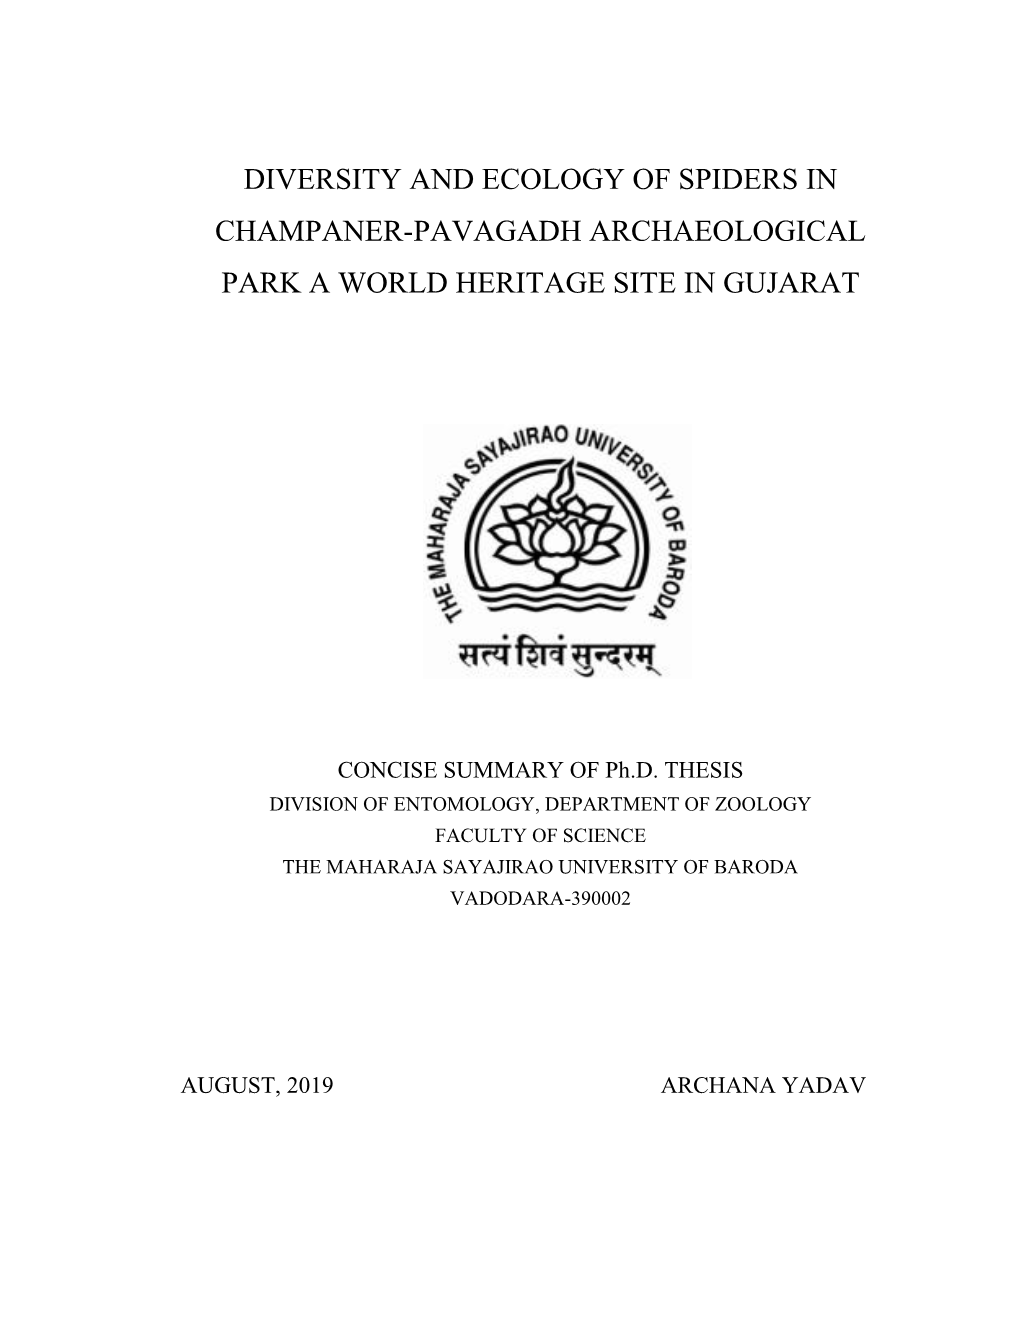 Diversity and Ecology of Spiders in Champaner-Pavagadh Archaeological Park a World Heritage Site in Gujarat